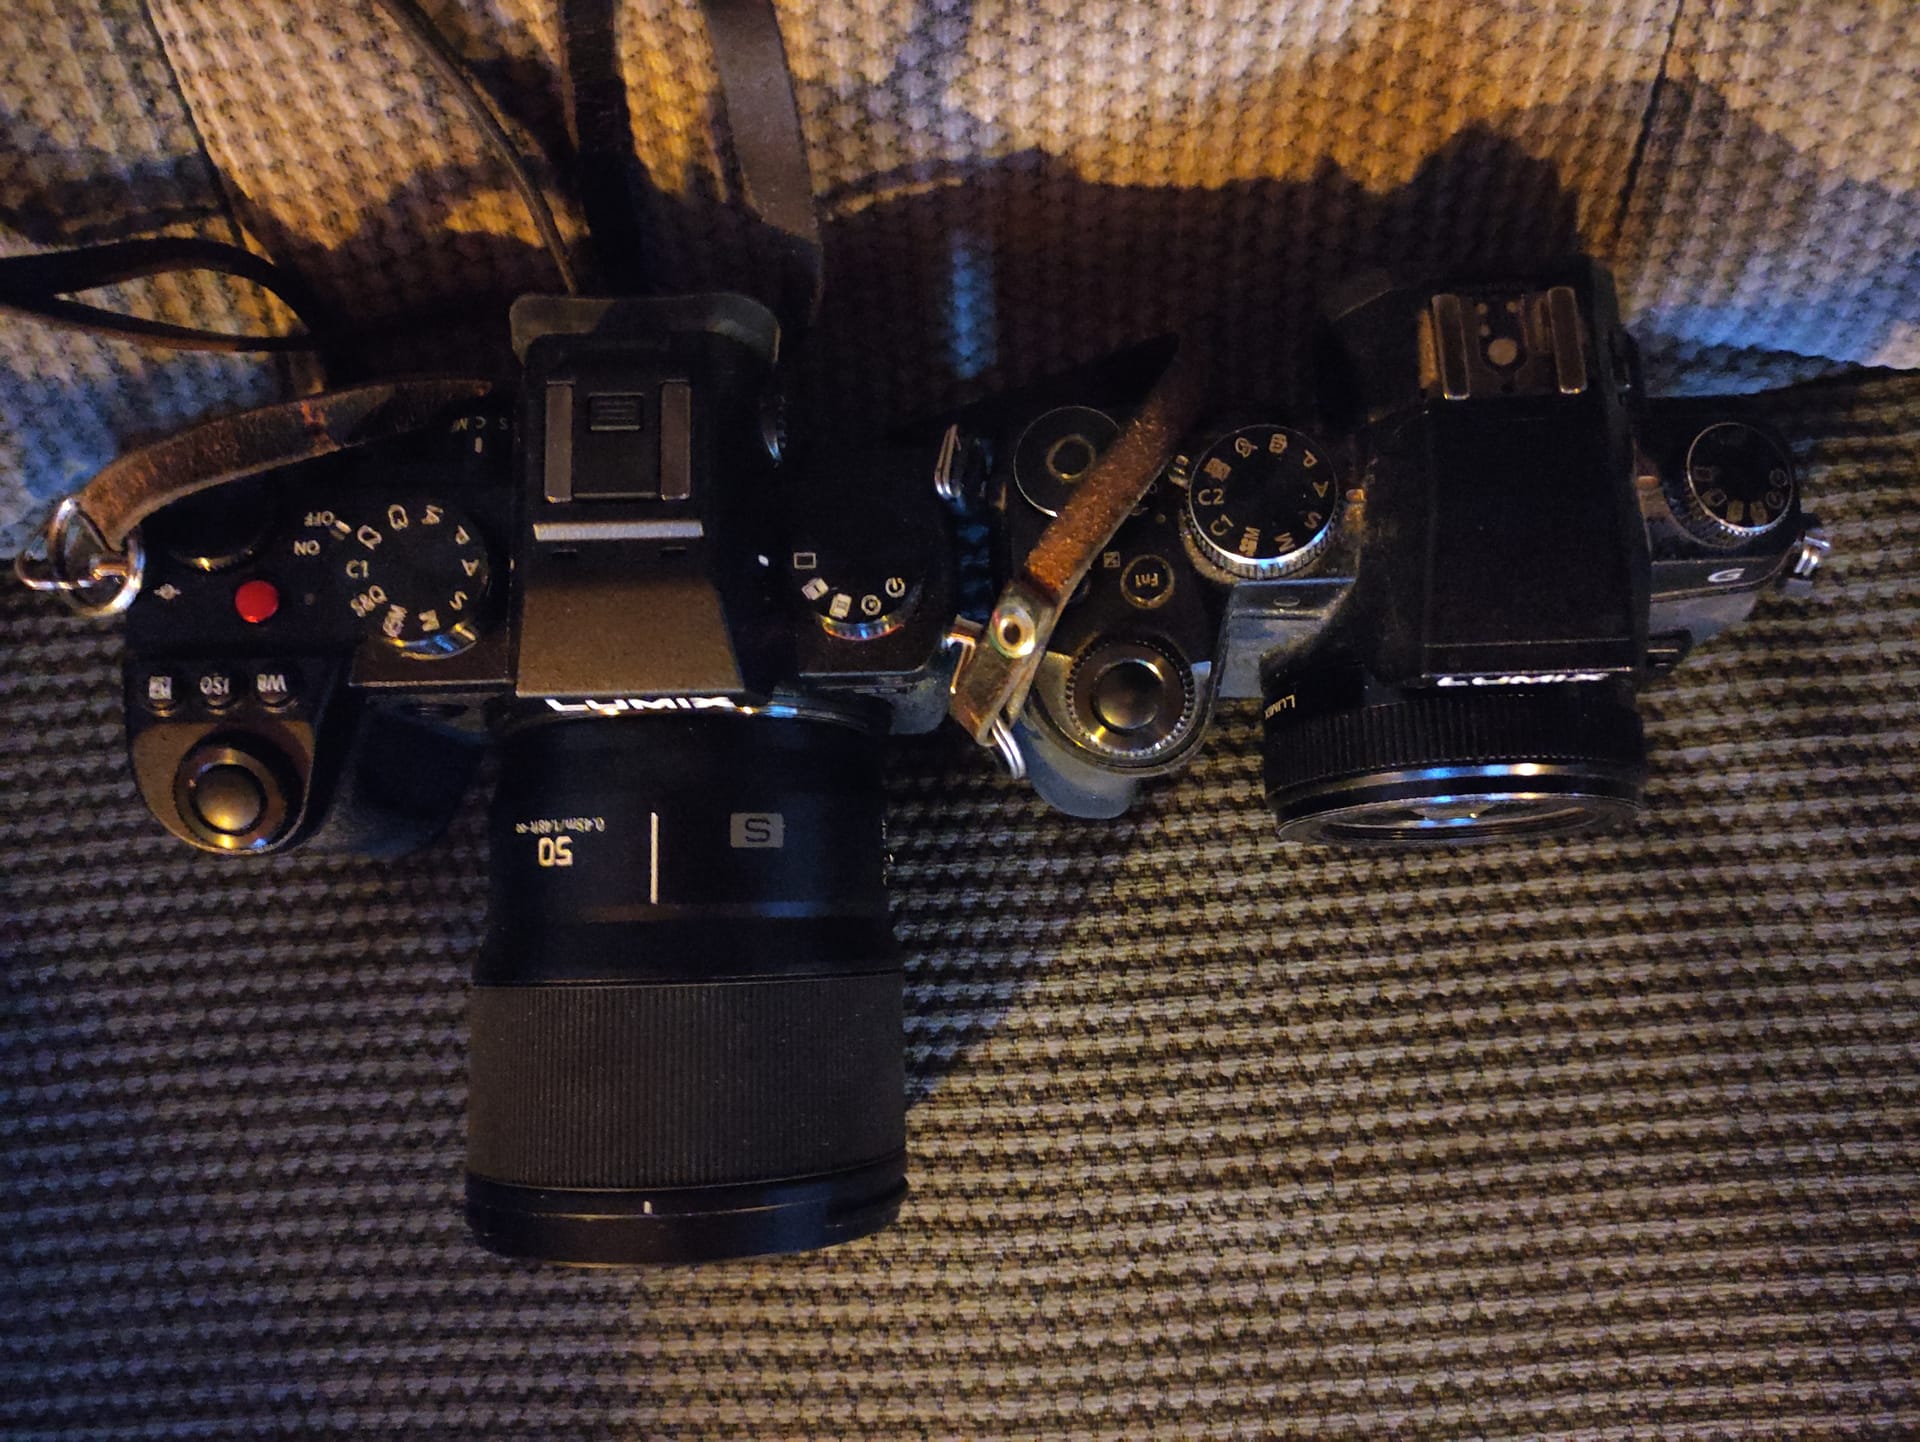 S5 on the left with the 50/1.8, G85 on the right with the 20/1.7